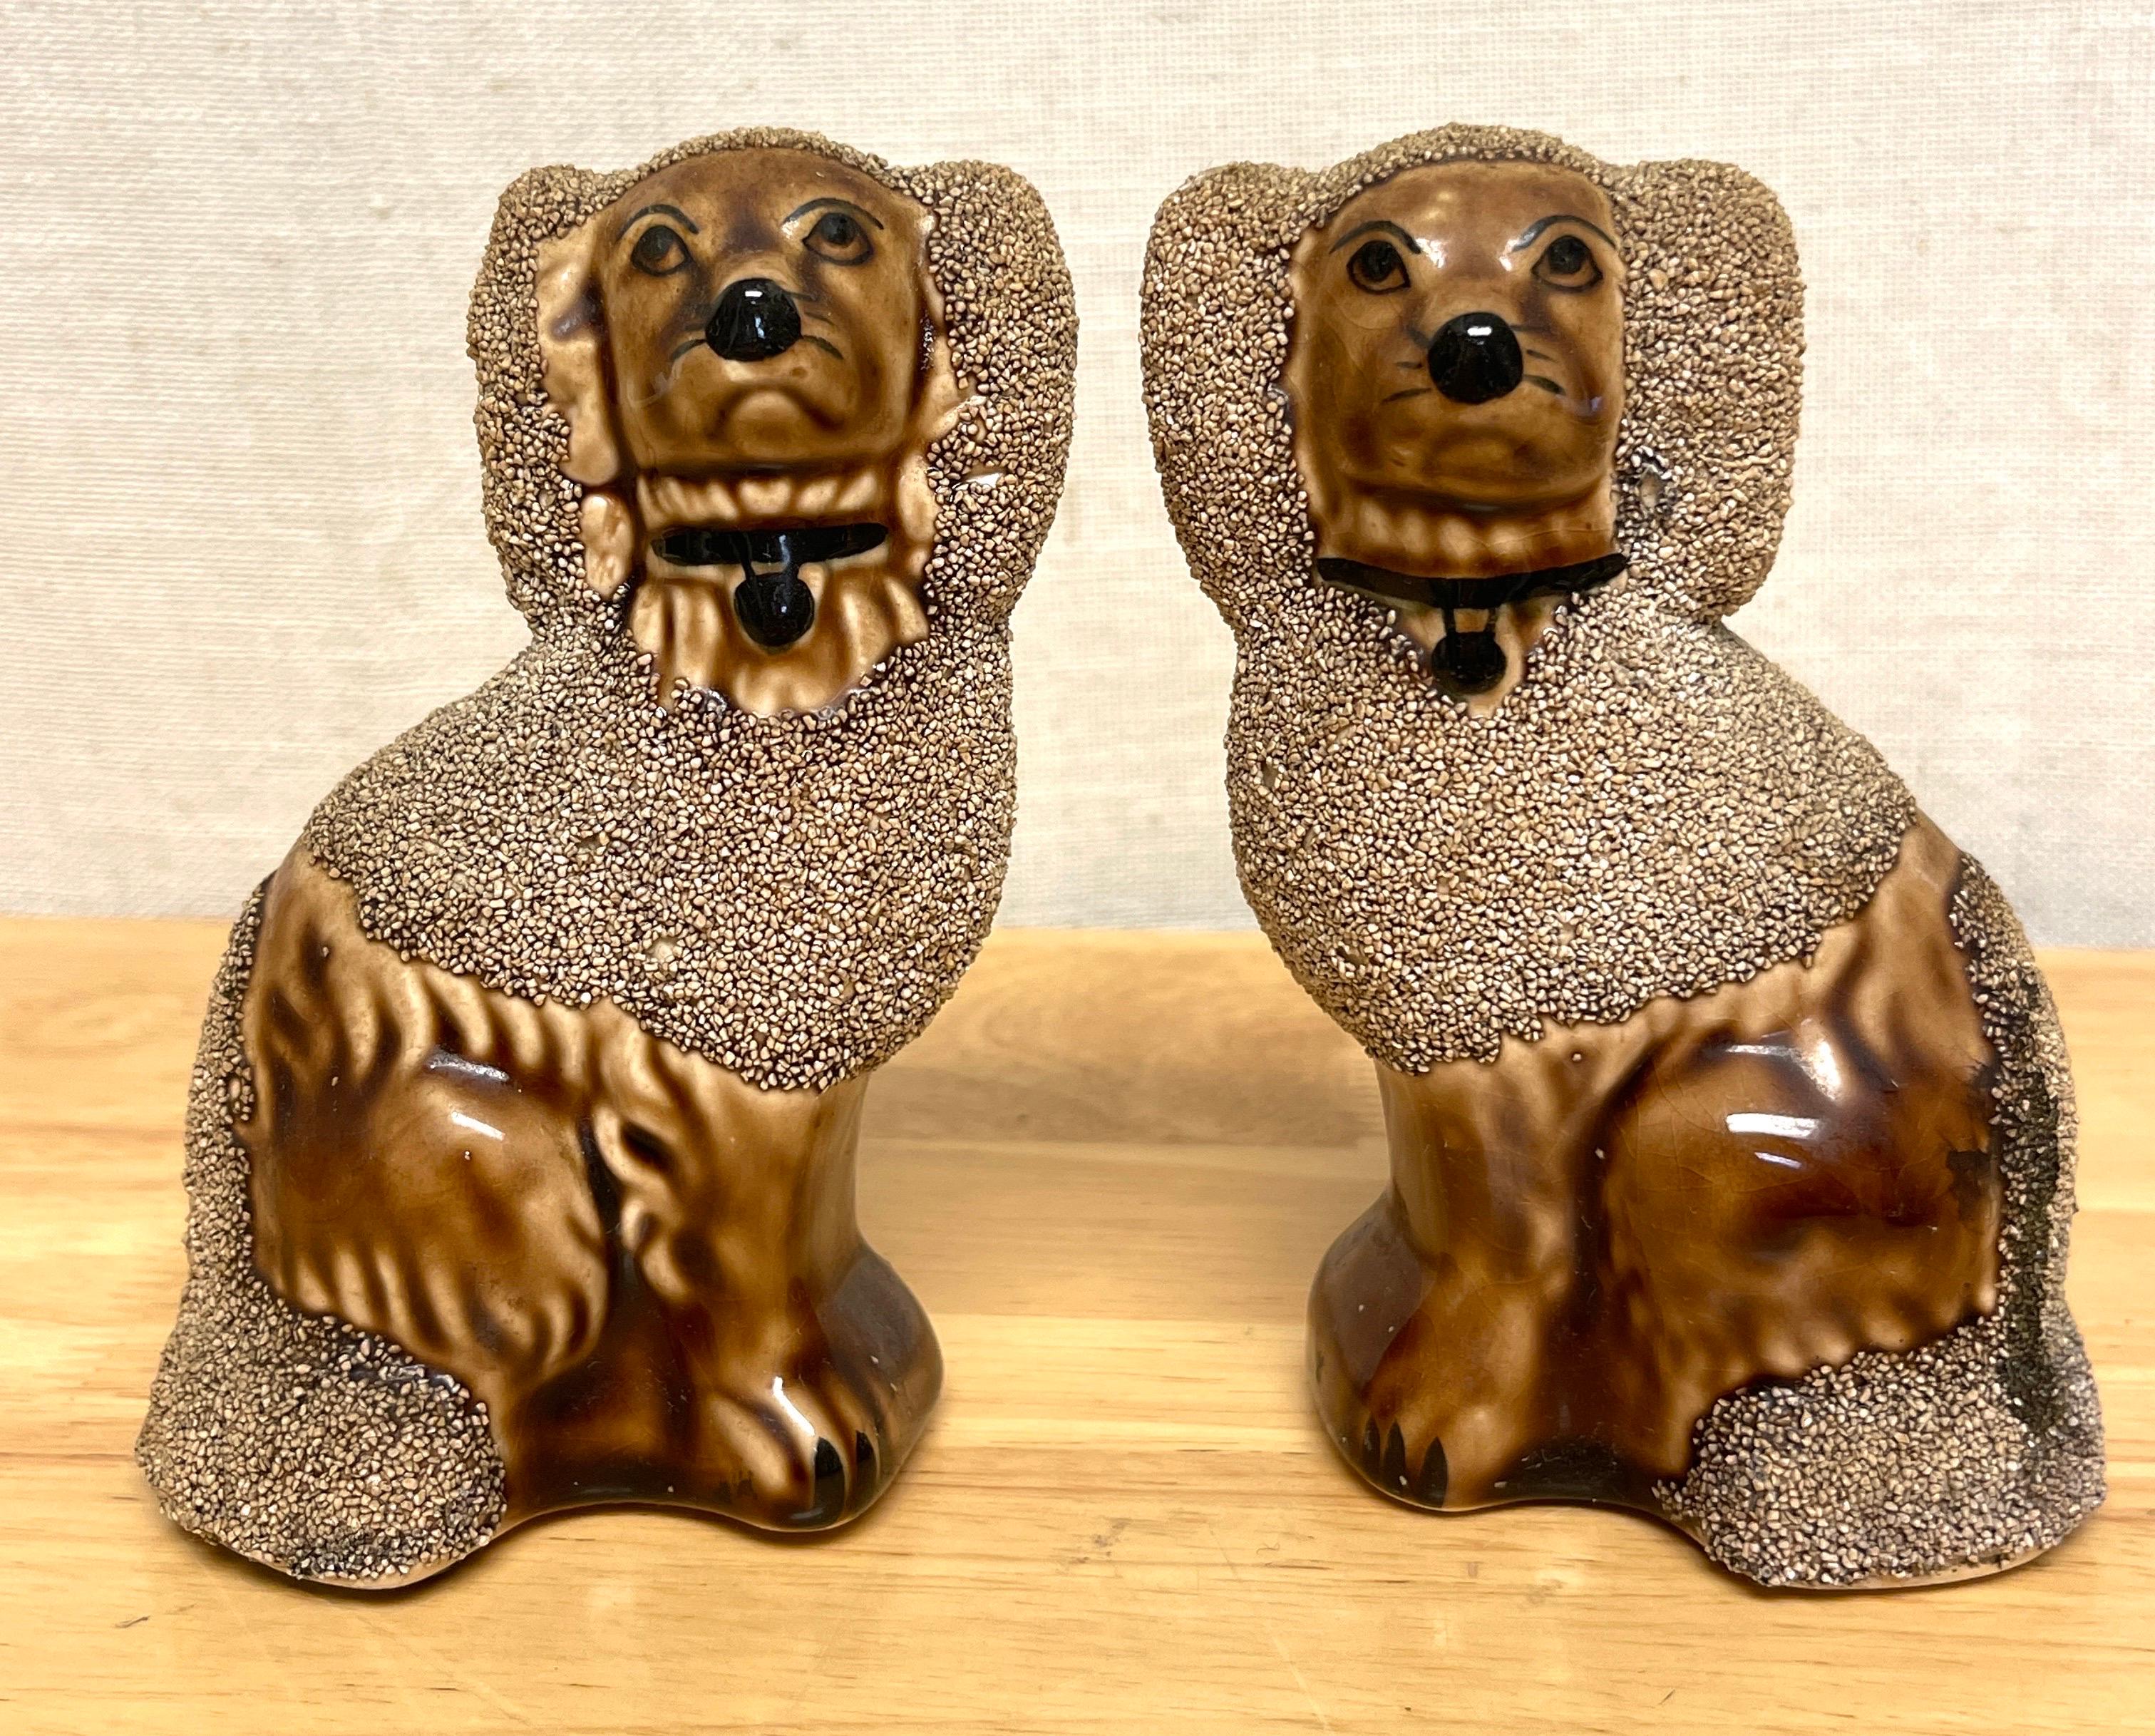 Pair of Diminutive Bennington Style Rockingham-Glazed Figures of seated Poodles 
USA, 20th 1950s

A charming later version of Bennington pottery works, Each diminutive seated poodle realistically modeled, glazed in earth-tone brown Rockingham